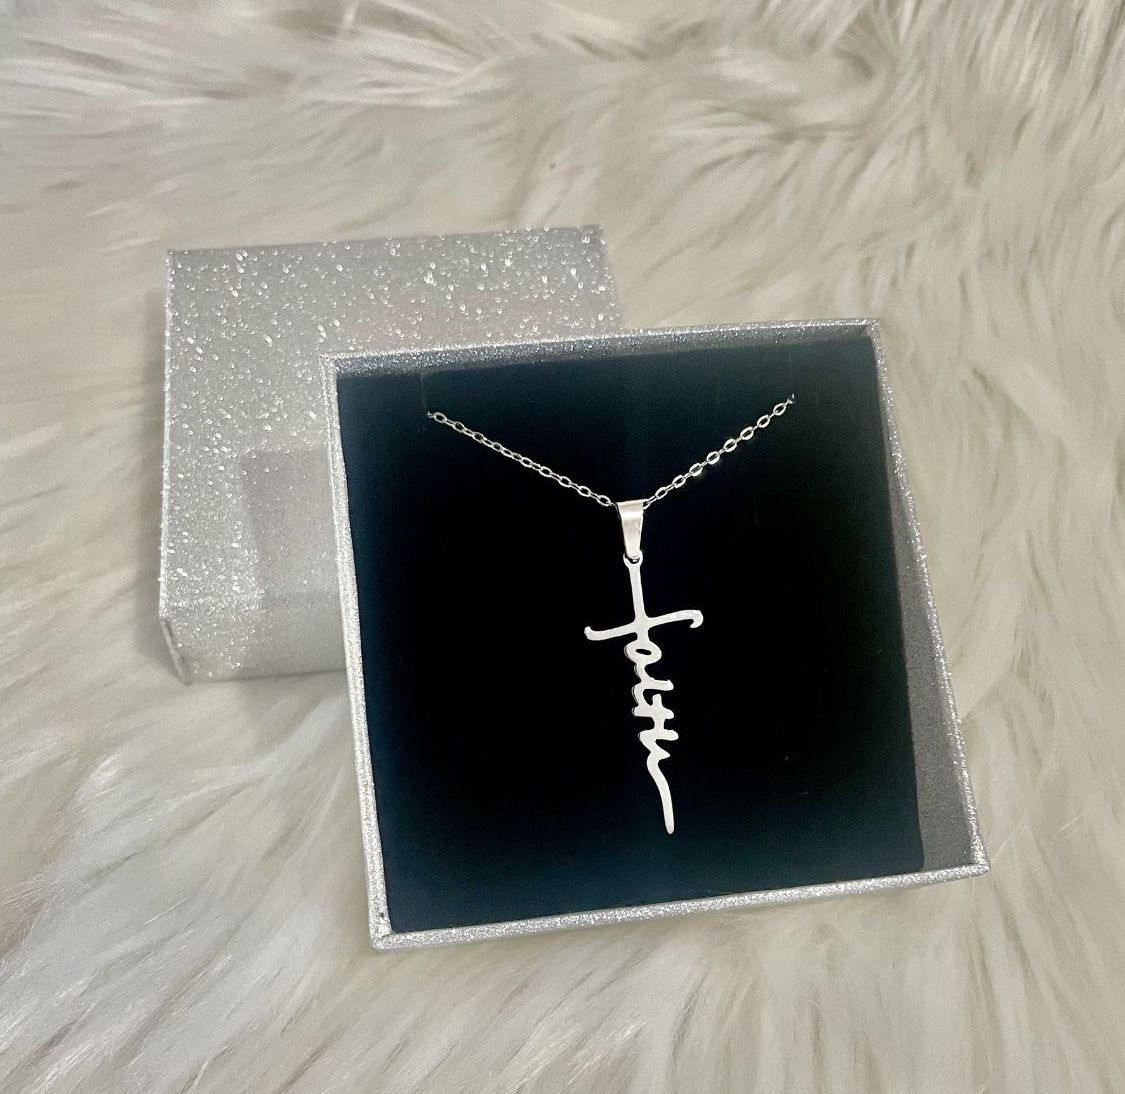 Brand New Beautiful Cross Faith Religious Necklace In Gift Box